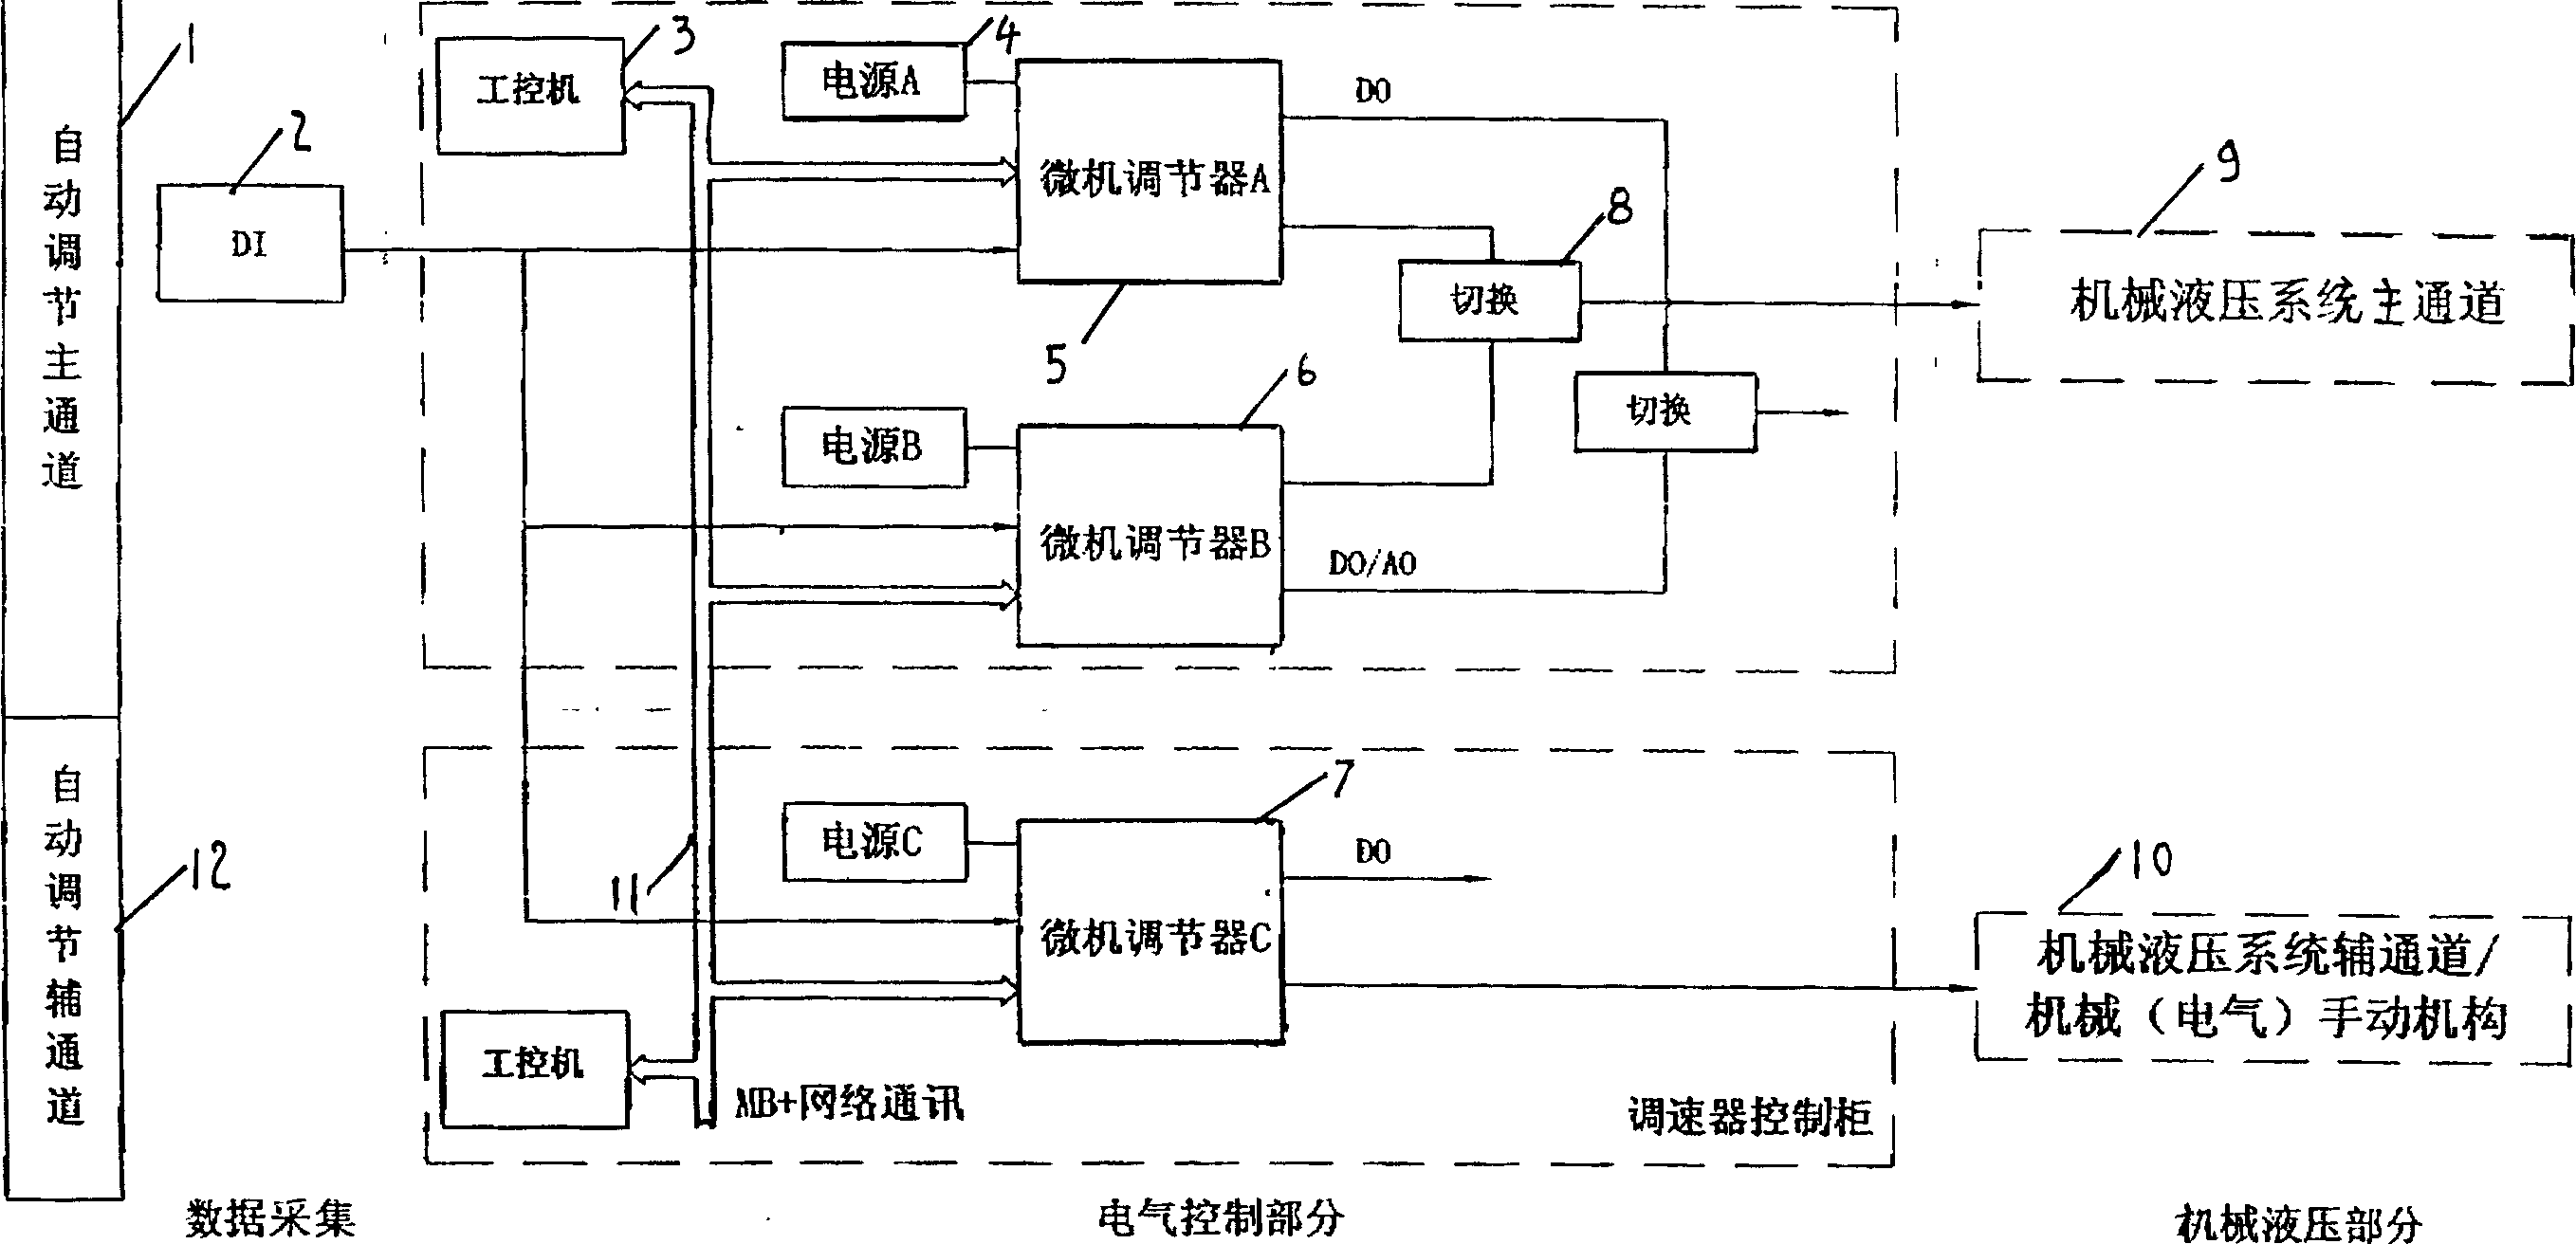 Double-channel cross redundancy system for digital microcomputer governor of large-scale hydroturbine